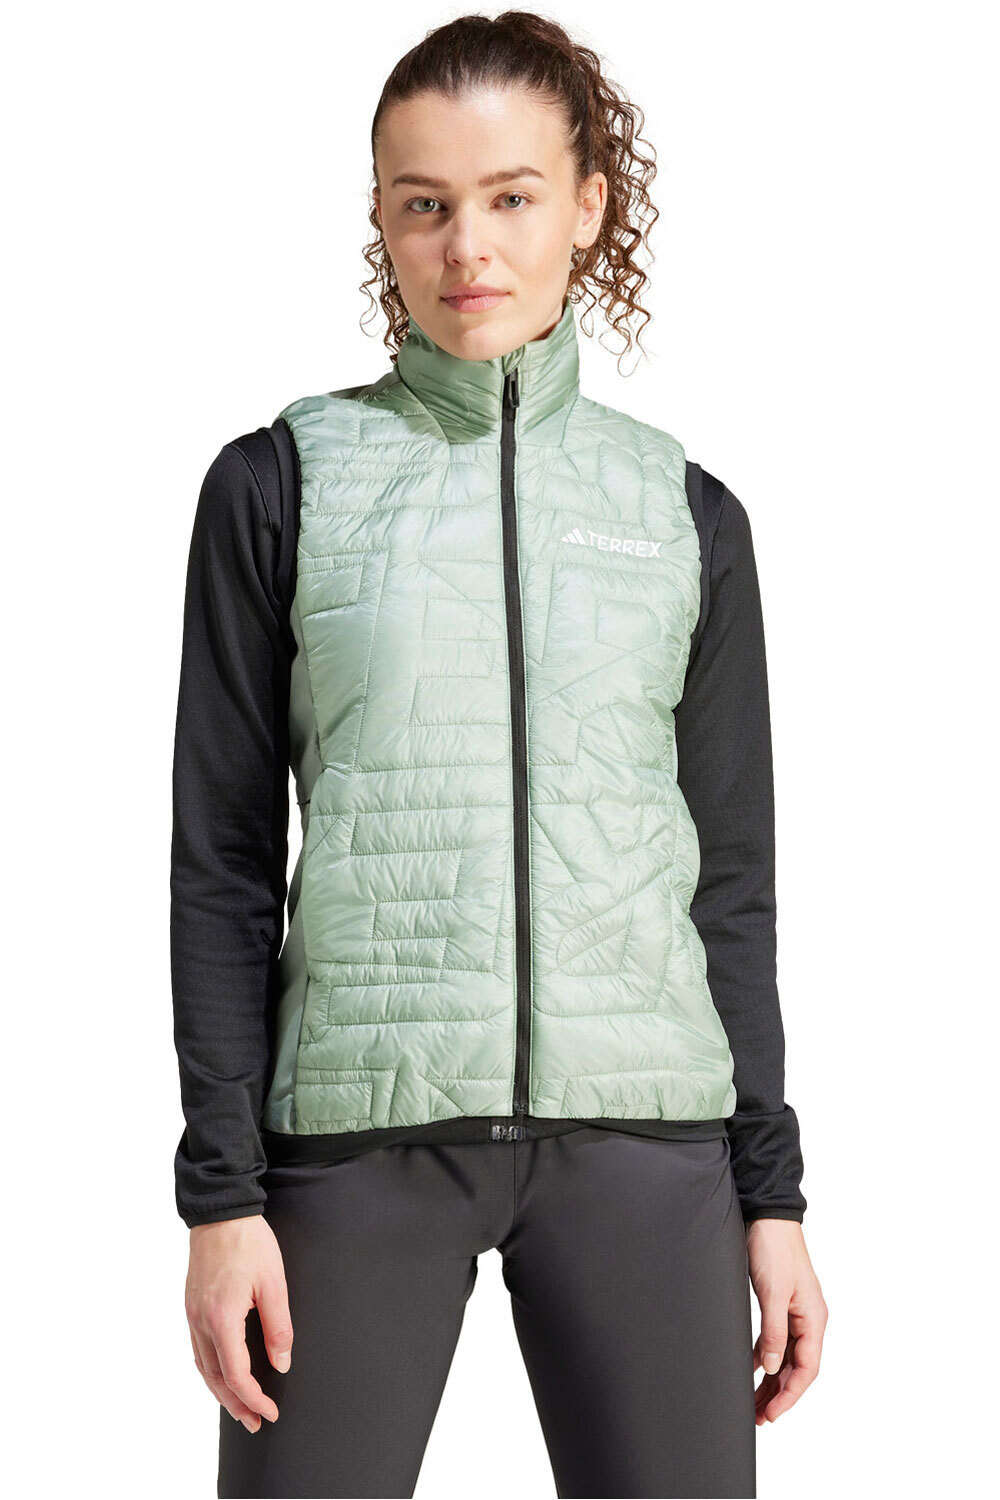 adidas chaleco outdoor mujer W XPR VAR HYB V vista frontal